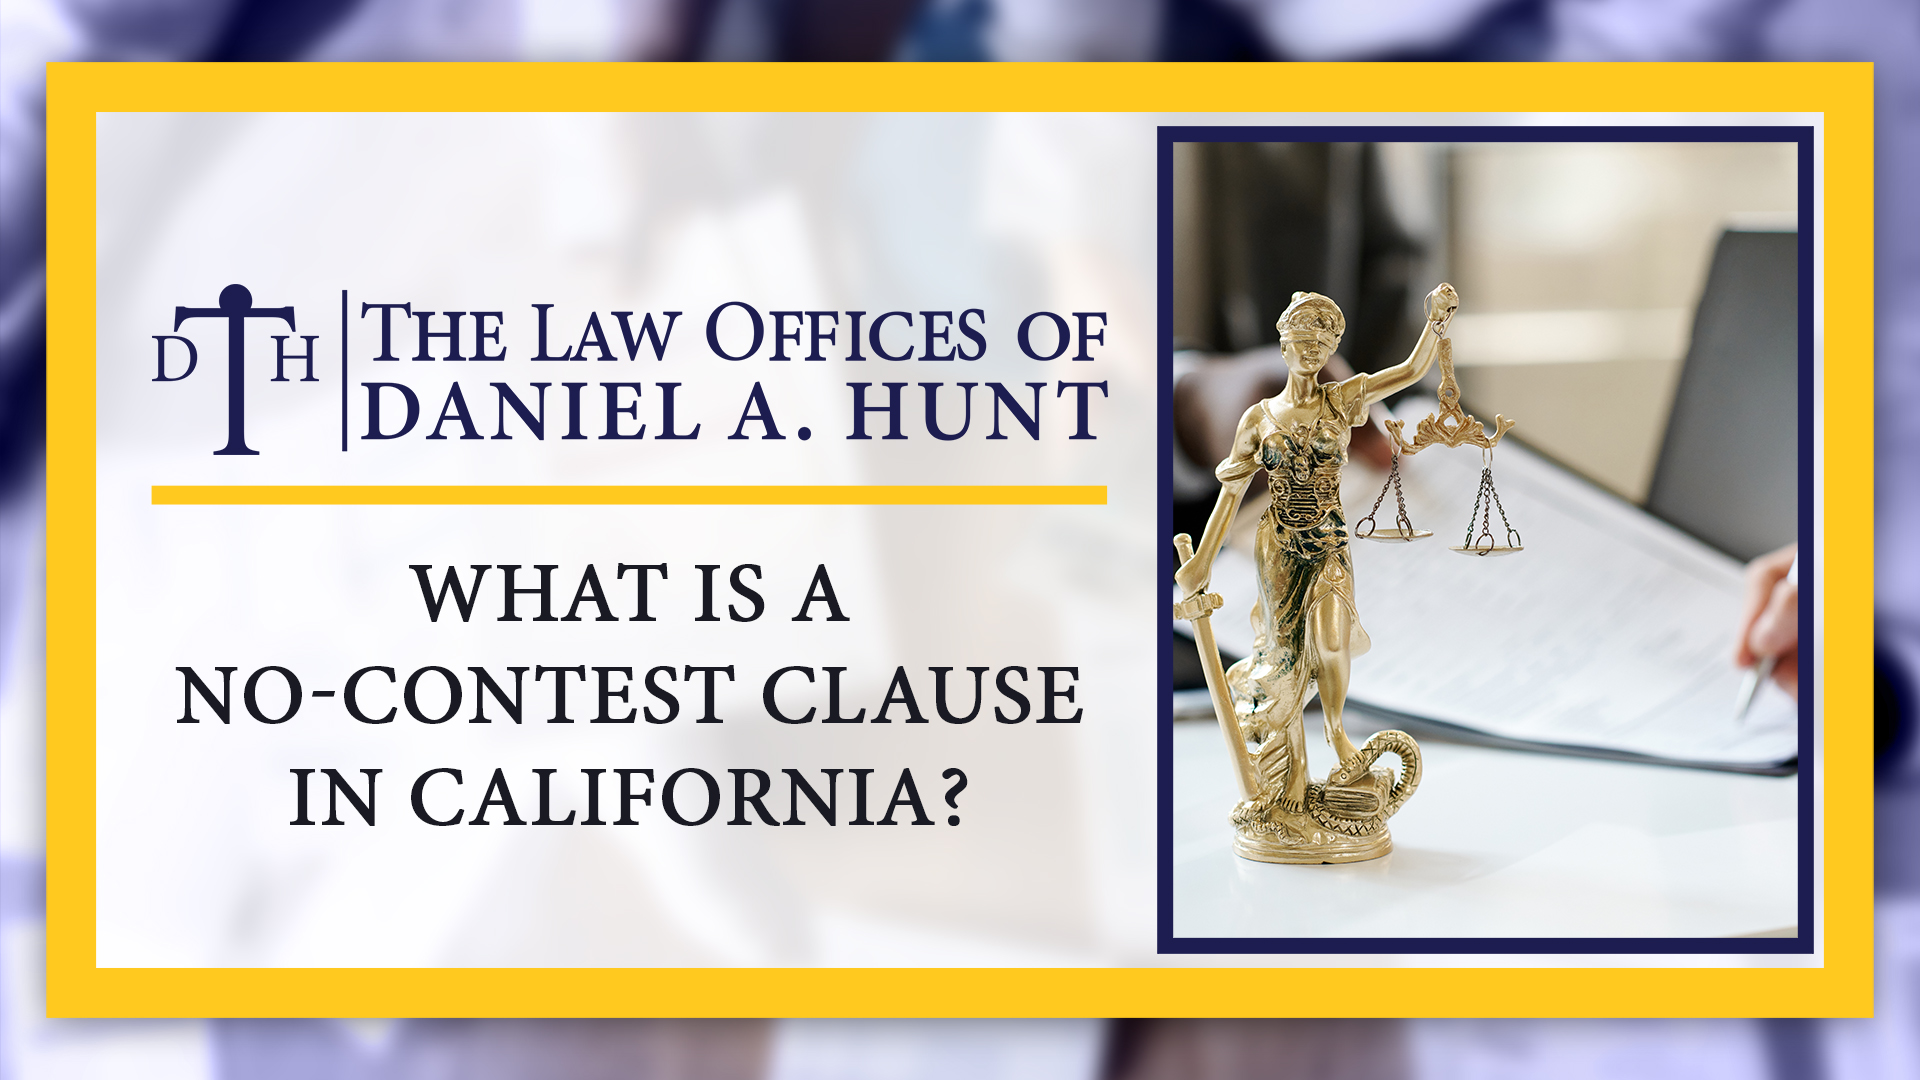 What is a No-Contest Clause in California